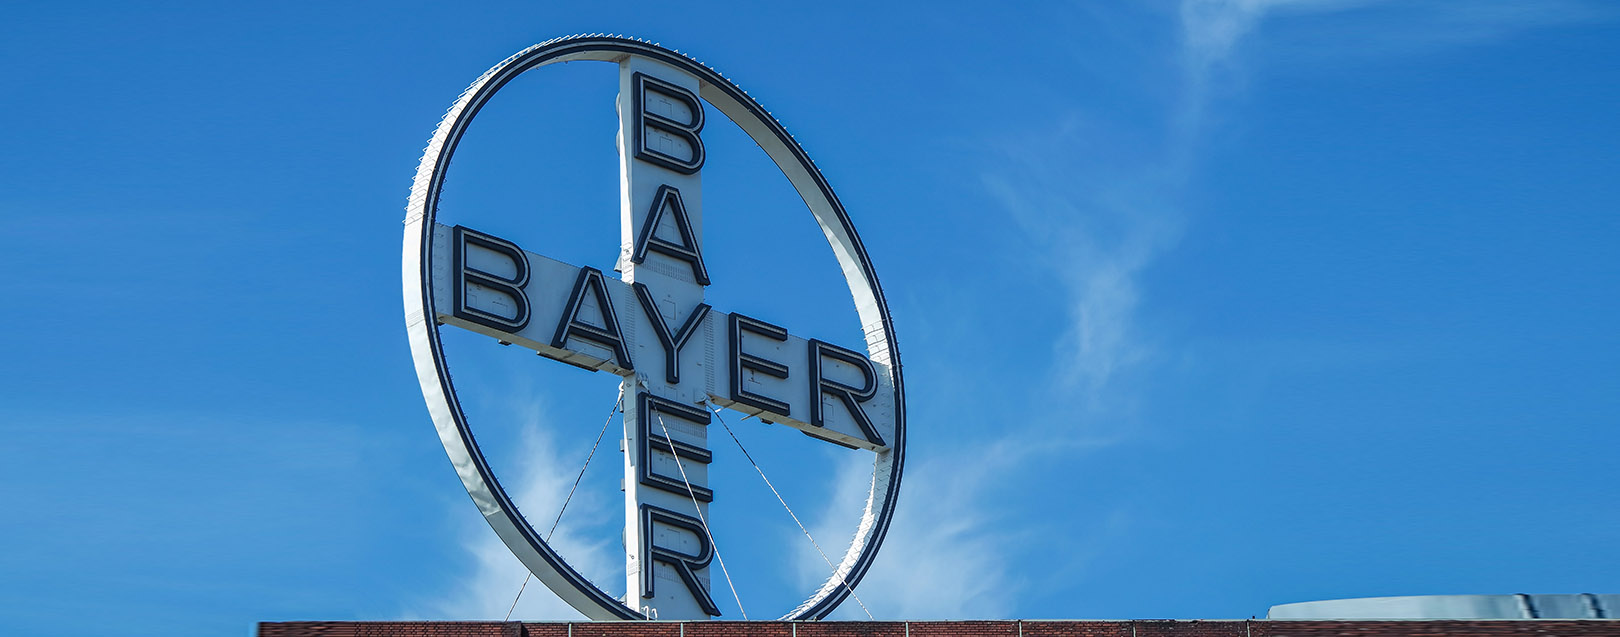 Bayer offers $62 bn to acquire US based Monsanto